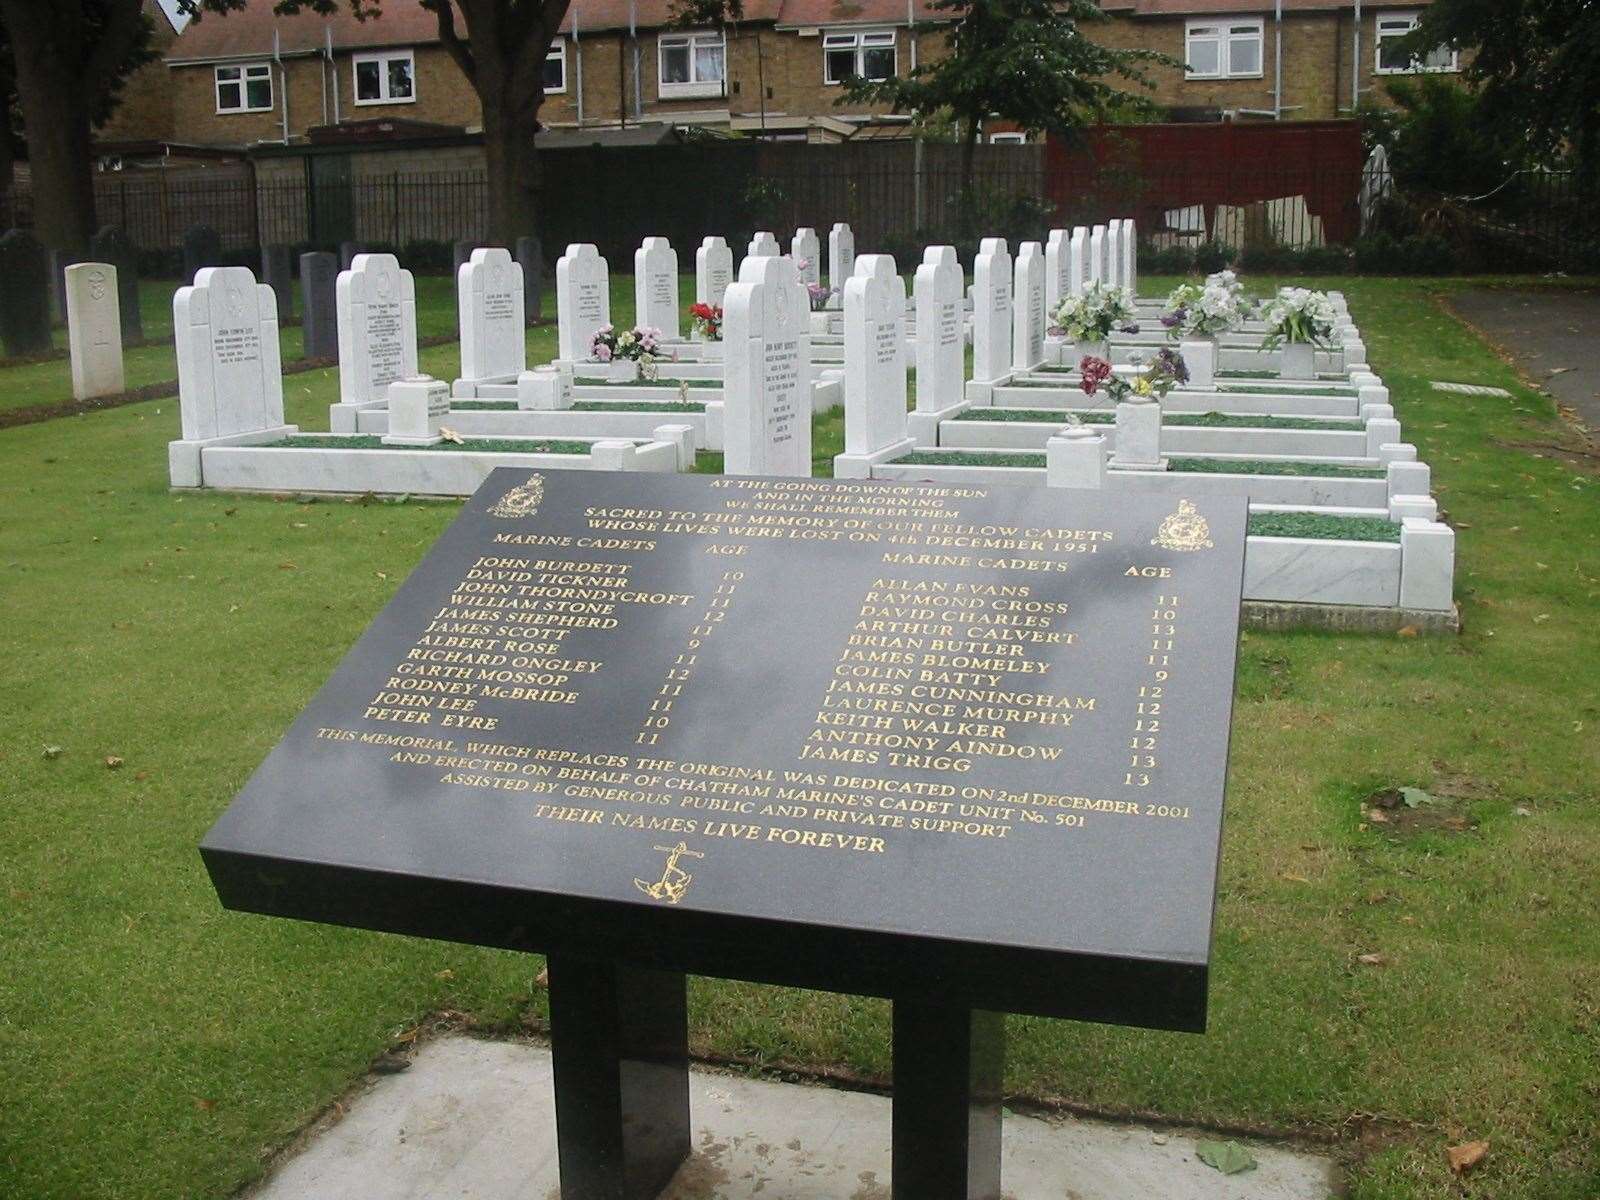 A memorial tablet to the Royal Marine Cadets, some as young as nine, killed when the bus ploughed into the group in Dock Road